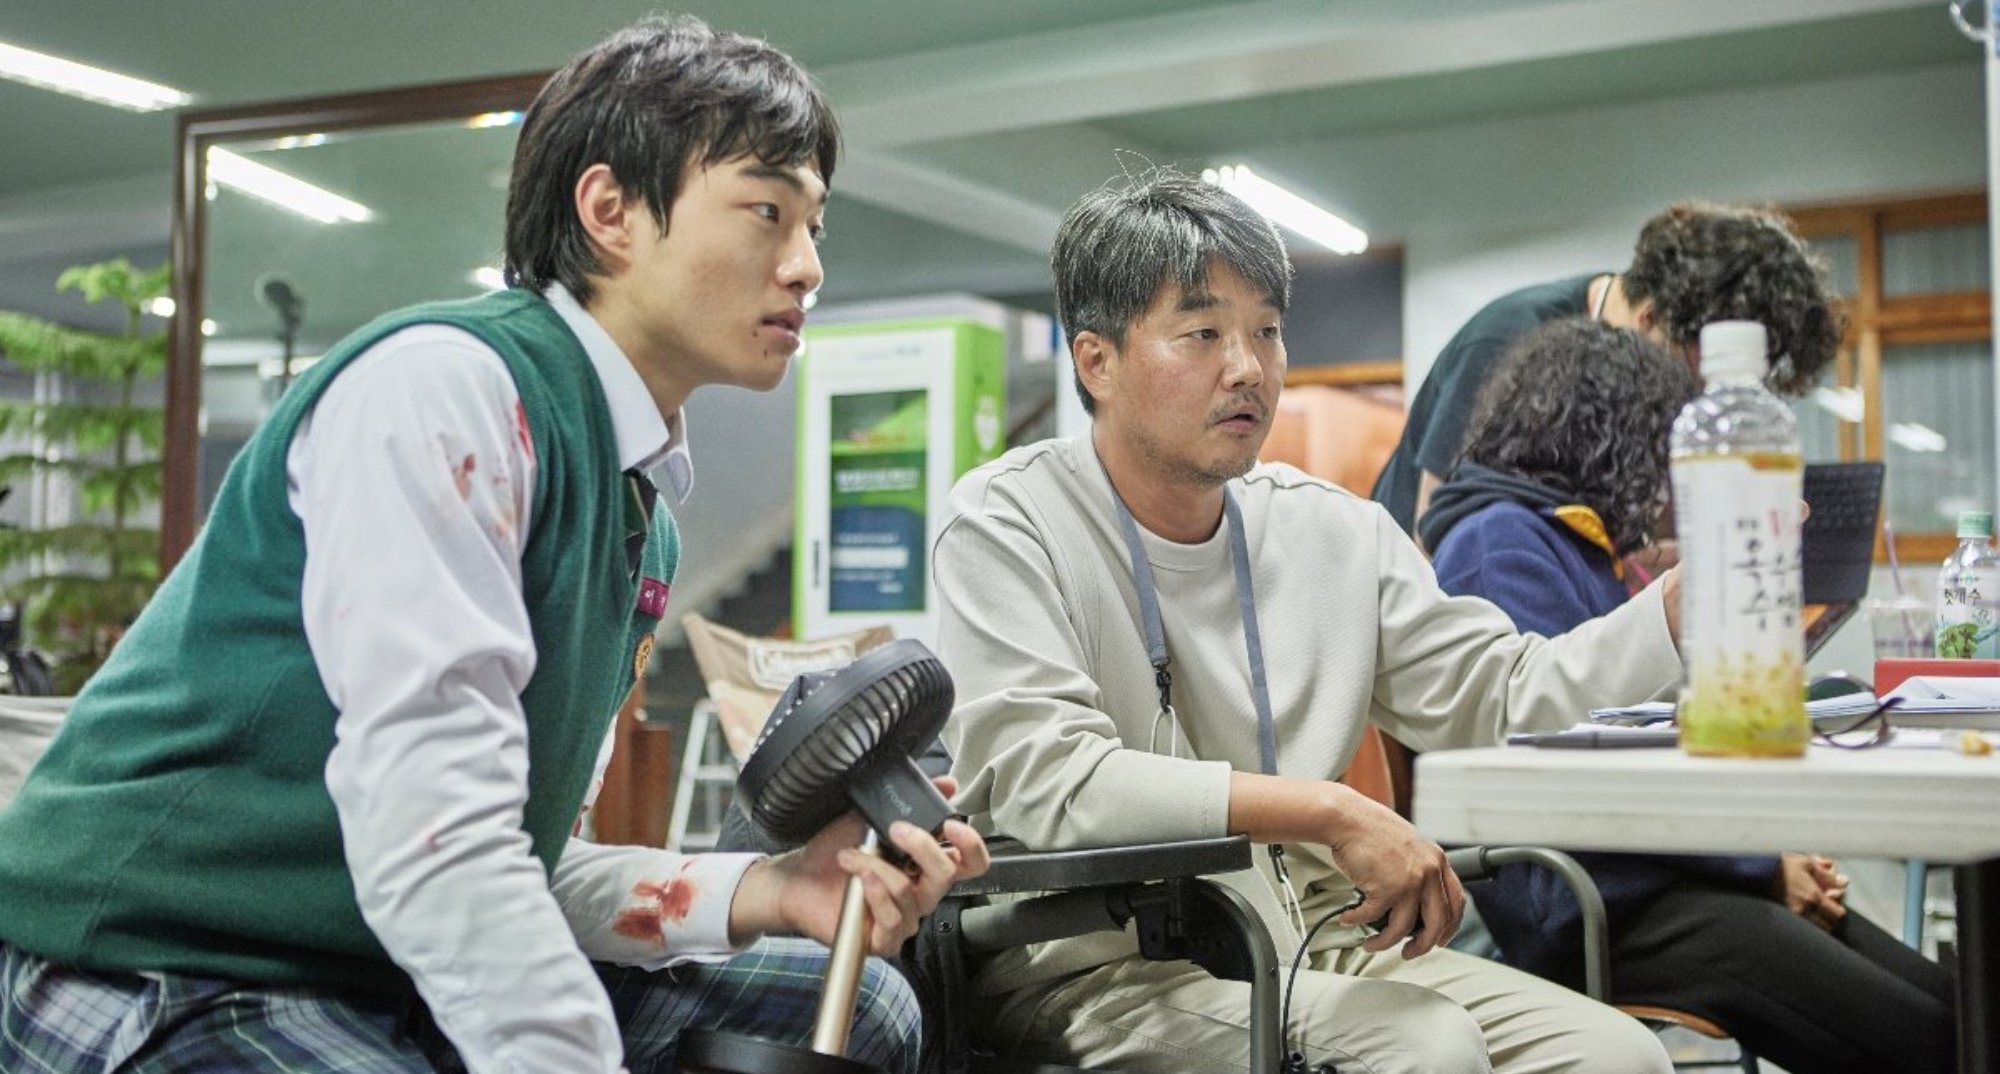 Director Lee Jae-gyu for 'All of Us Are Dead' and season 2 with actor Yoon Chan-young